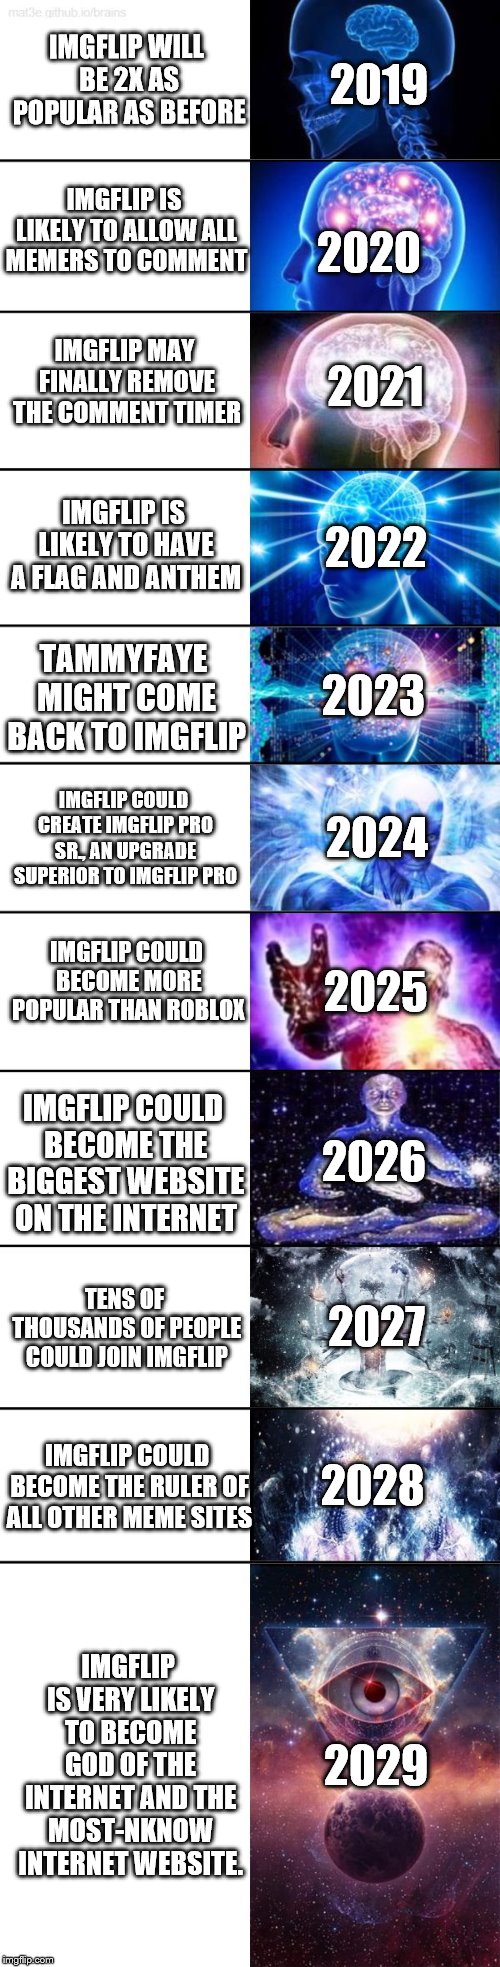 A Prediction of Imgflip's Future | IMGFLIP WILL BE 2X AS POPULAR AS BEFORE; 2019; IMGFLIP IS LIKELY TO ALLOW ALL MEMERS TO COMMENT; 2020; IMGFLIP MAY FINALLY REMOVE THE COMMENT TIMER; 2021; IMGFLIP IS LIKELY TO HAVE A FLAG AND ANTHEM; 2022; 2023; TAMMYFAYE MIGHT COME BACK TO IMGFLIP; 2024; IMGFLIP COULD CREATE IMGFLIP PRO SR., AN UPGRADE SUPERIOR TO IMGFLIP PRO; IMGFLIP COULD BECOME MORE POPULAR THAN ROBLOX; 2025; 2026; IMGFLIP COULD BECOME THE BIGGEST WEBSITE ON THE INTERNET; TENS OF THOUSANDS OF PEOPLE COULD JOIN IMGFLIP; 2027; 2028; IMGFLIP COULD BECOME THE RULER OF ALL OTHER MEME SITES; 2029; IMGFLIP IS VERY LIKELY TO BECOME GOD OF THE INTERNET AND THE MOST-NKNOW INTERNET WEBSITE. | image tagged in extended expanding brain,future,prediction,timeline,imgflip | made w/ Imgflip meme maker